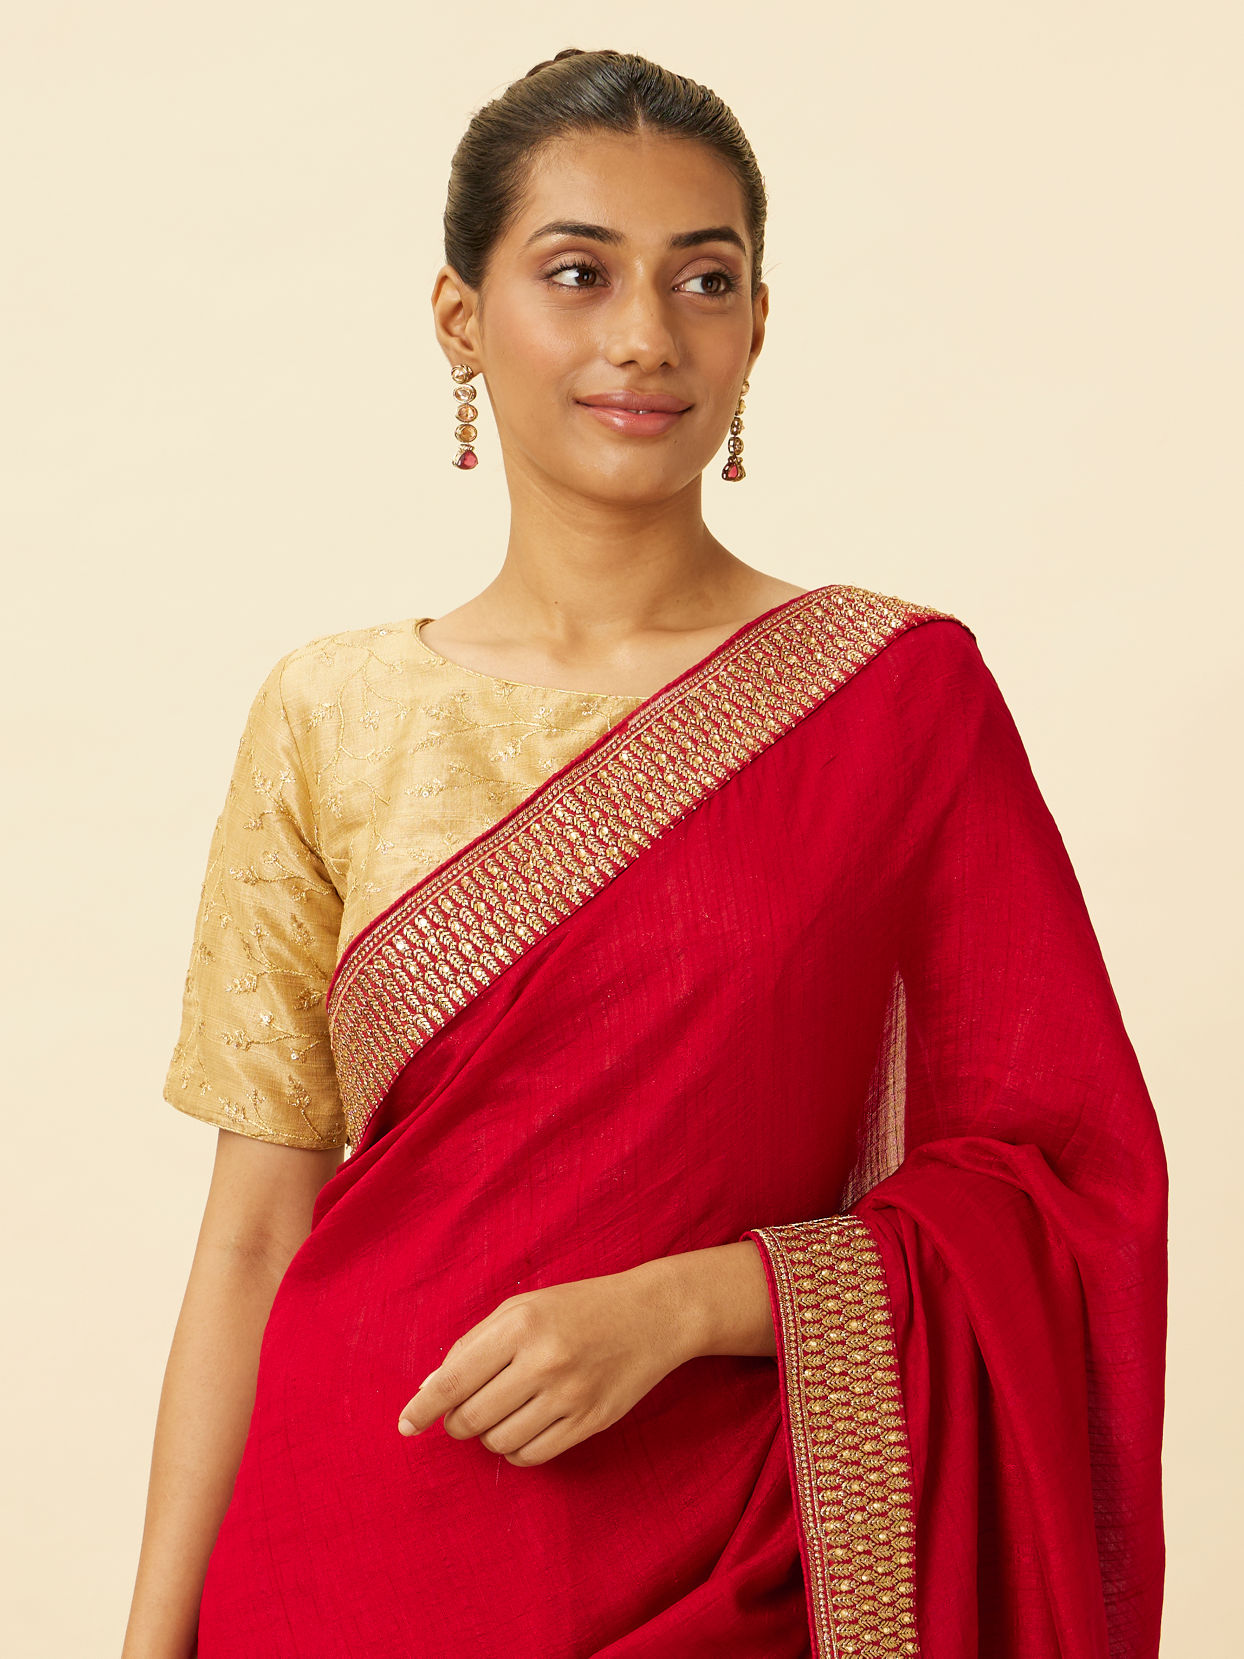 Fiesta Red Saree with Fern Embroidered Border image number 1